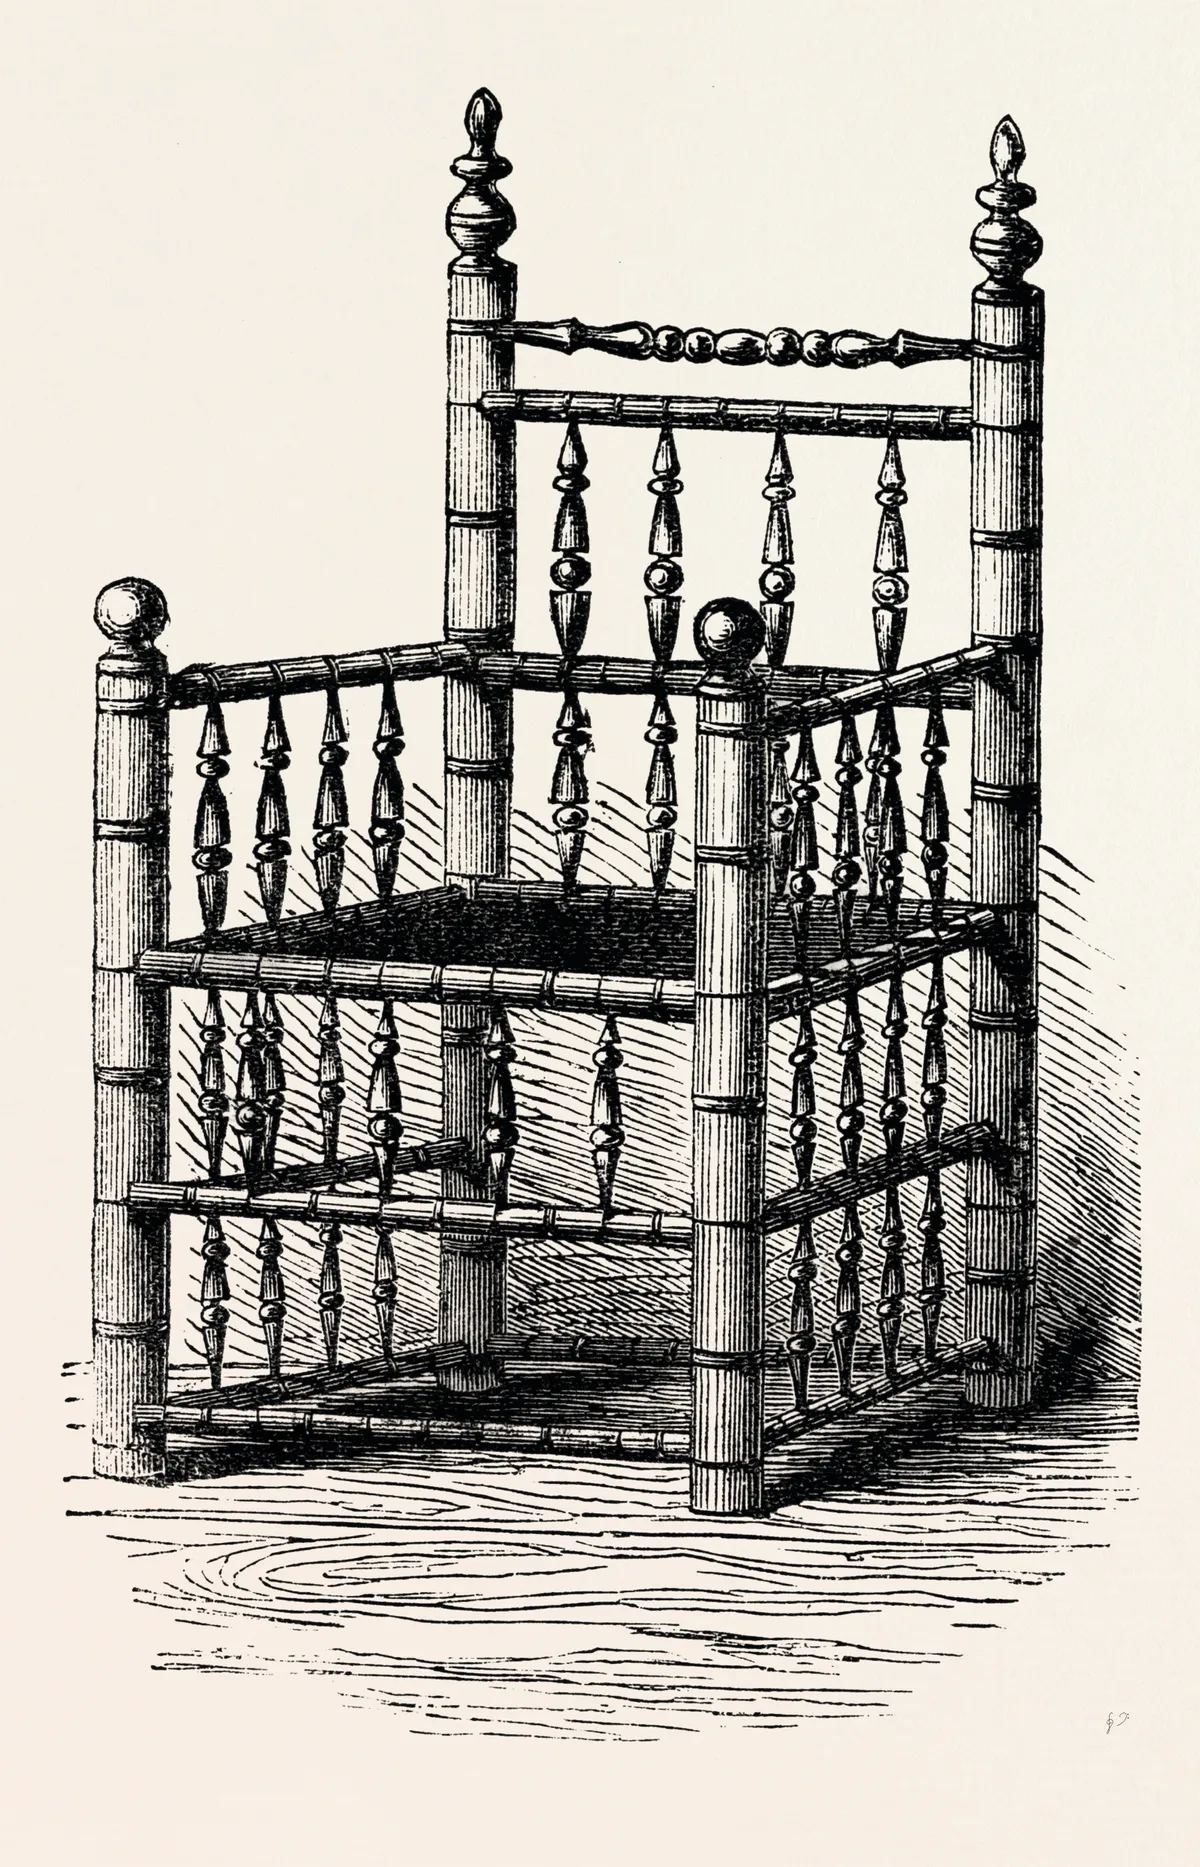 Brewster's Chair, Preserved At Pilgrim Hall, New Plymouth, United States Of America, US, USA, 1870s Engraving. (Photo by: Universal History Archive/Universal Images Group via Getty Images)